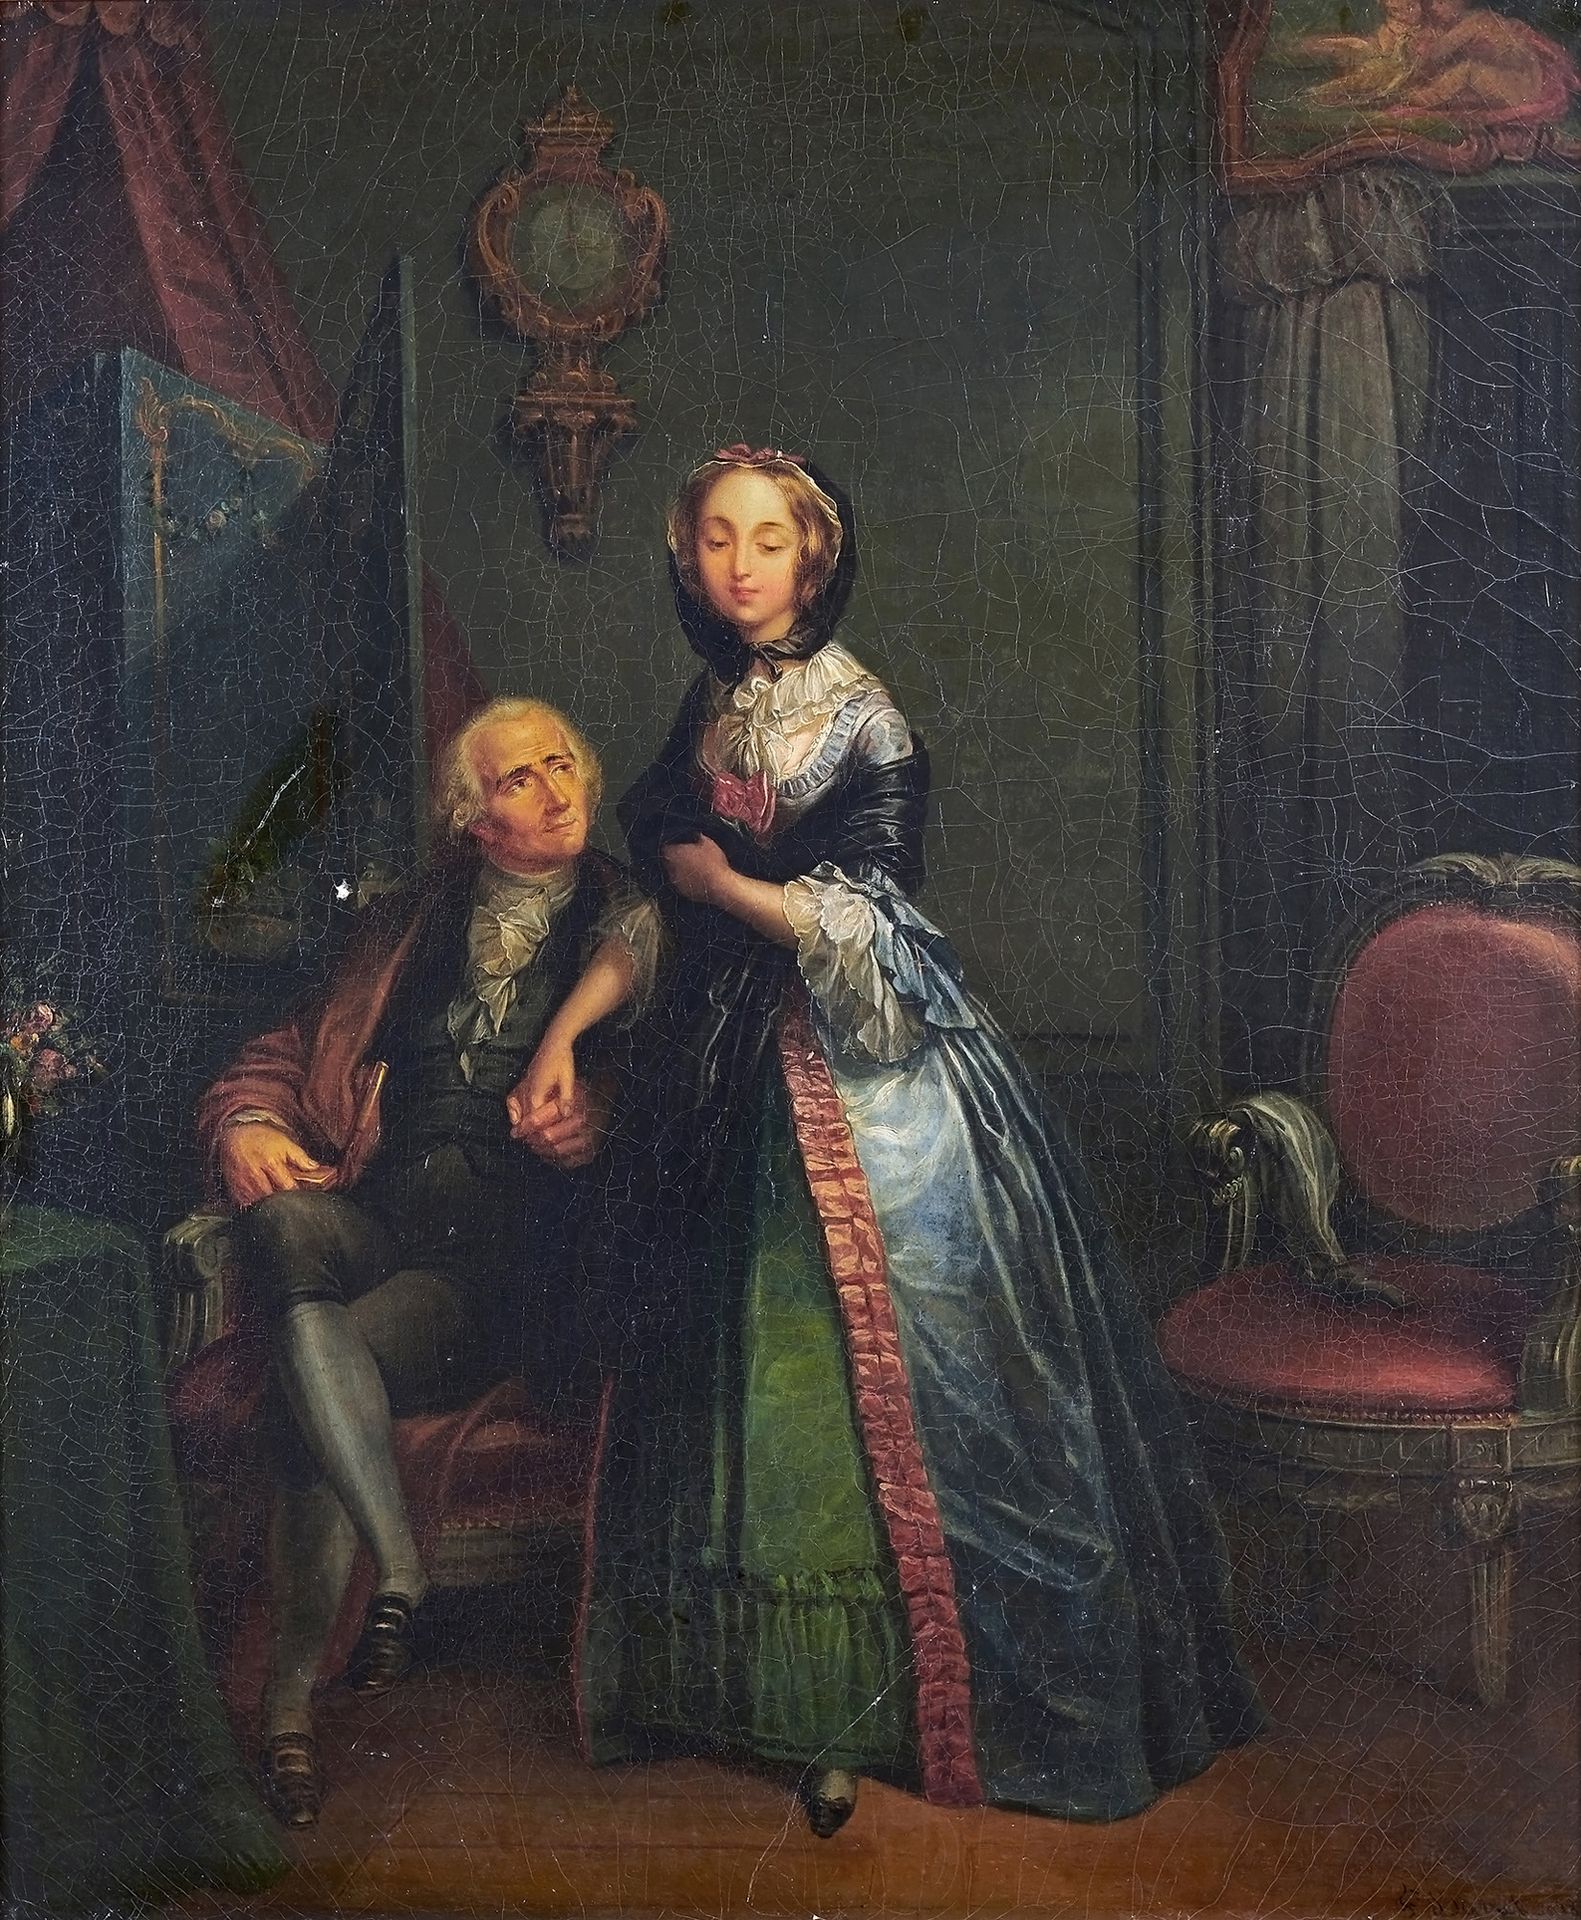 Félix BARRET (1807-1849) Couple in an interior
Oil on canvas, signed and dated 1&hellip;